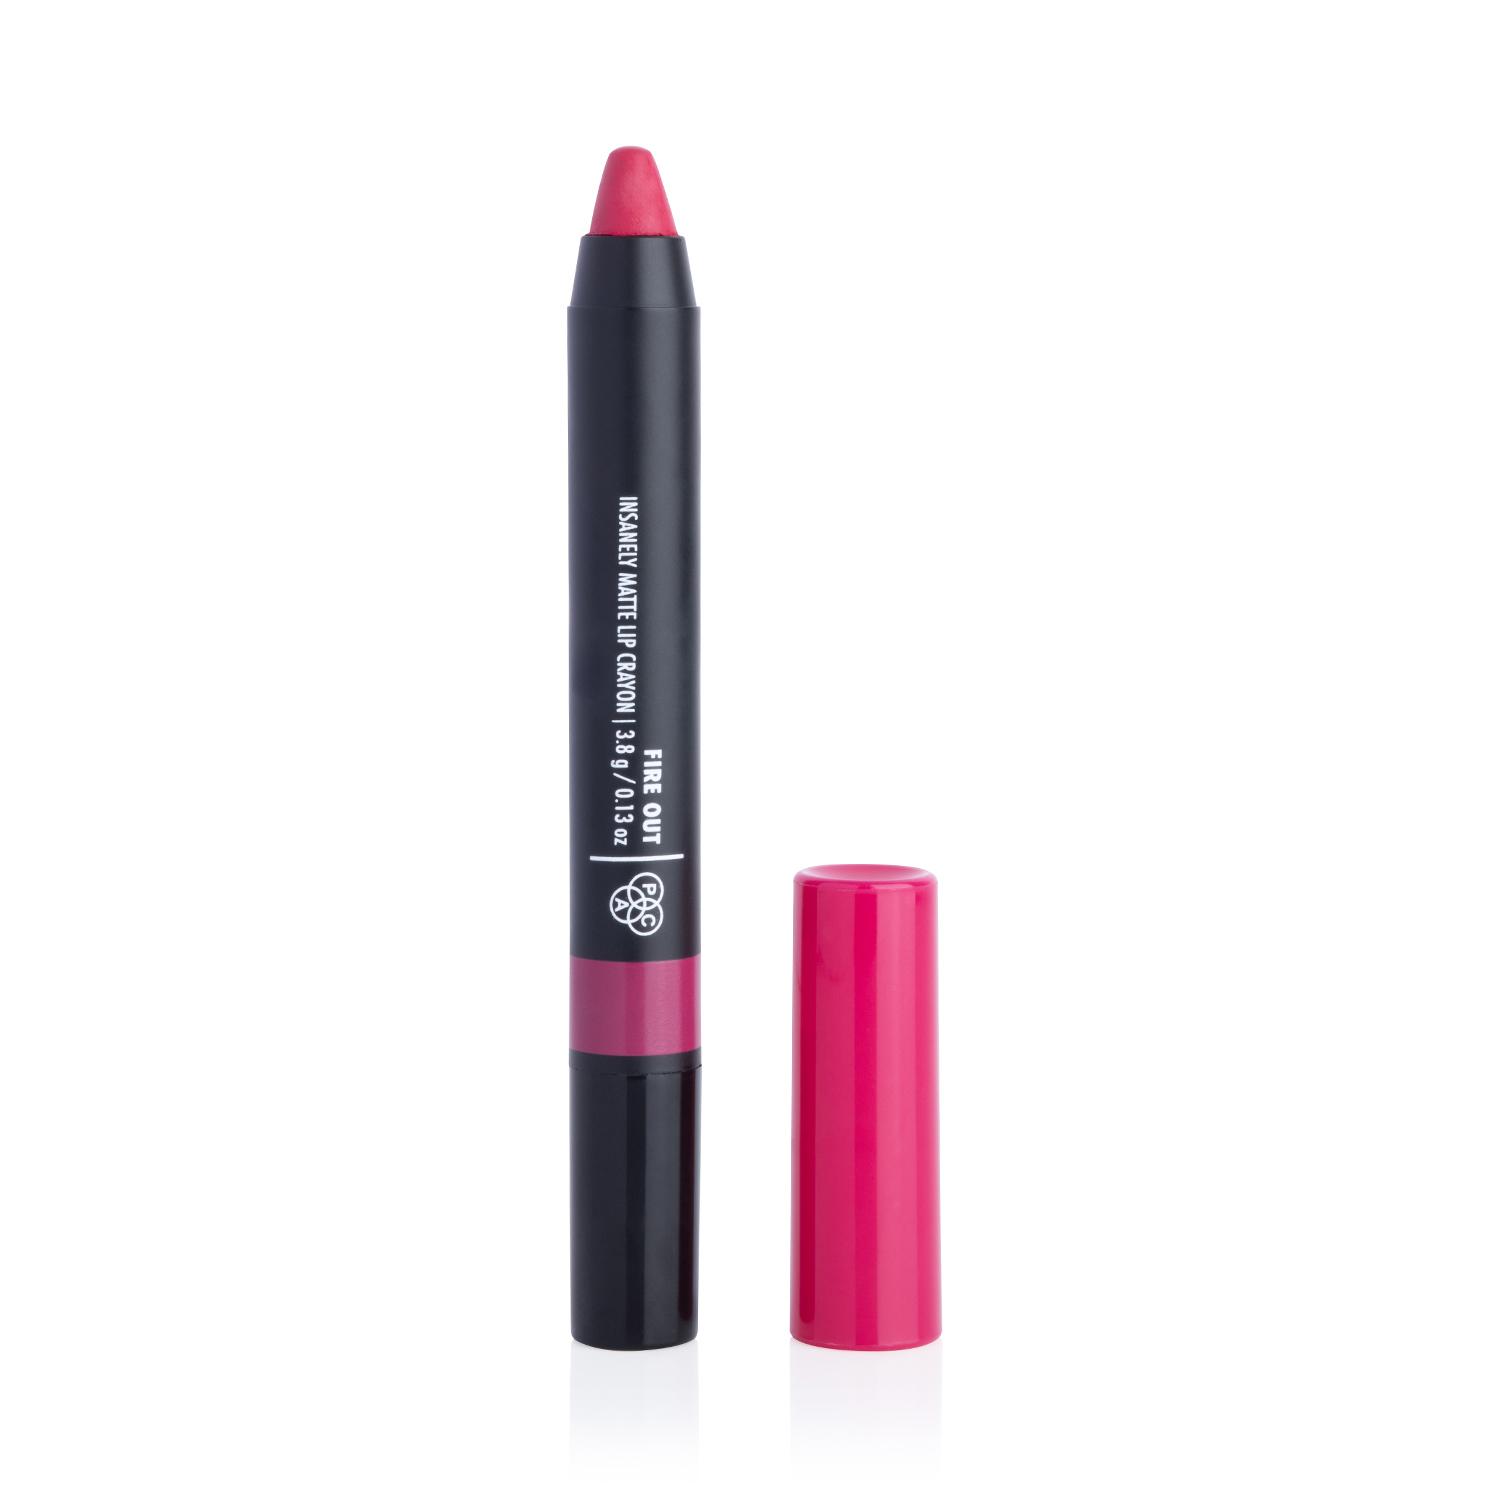 PAC Insanely Matte Lip Crayon - Fire Out (3.8g)